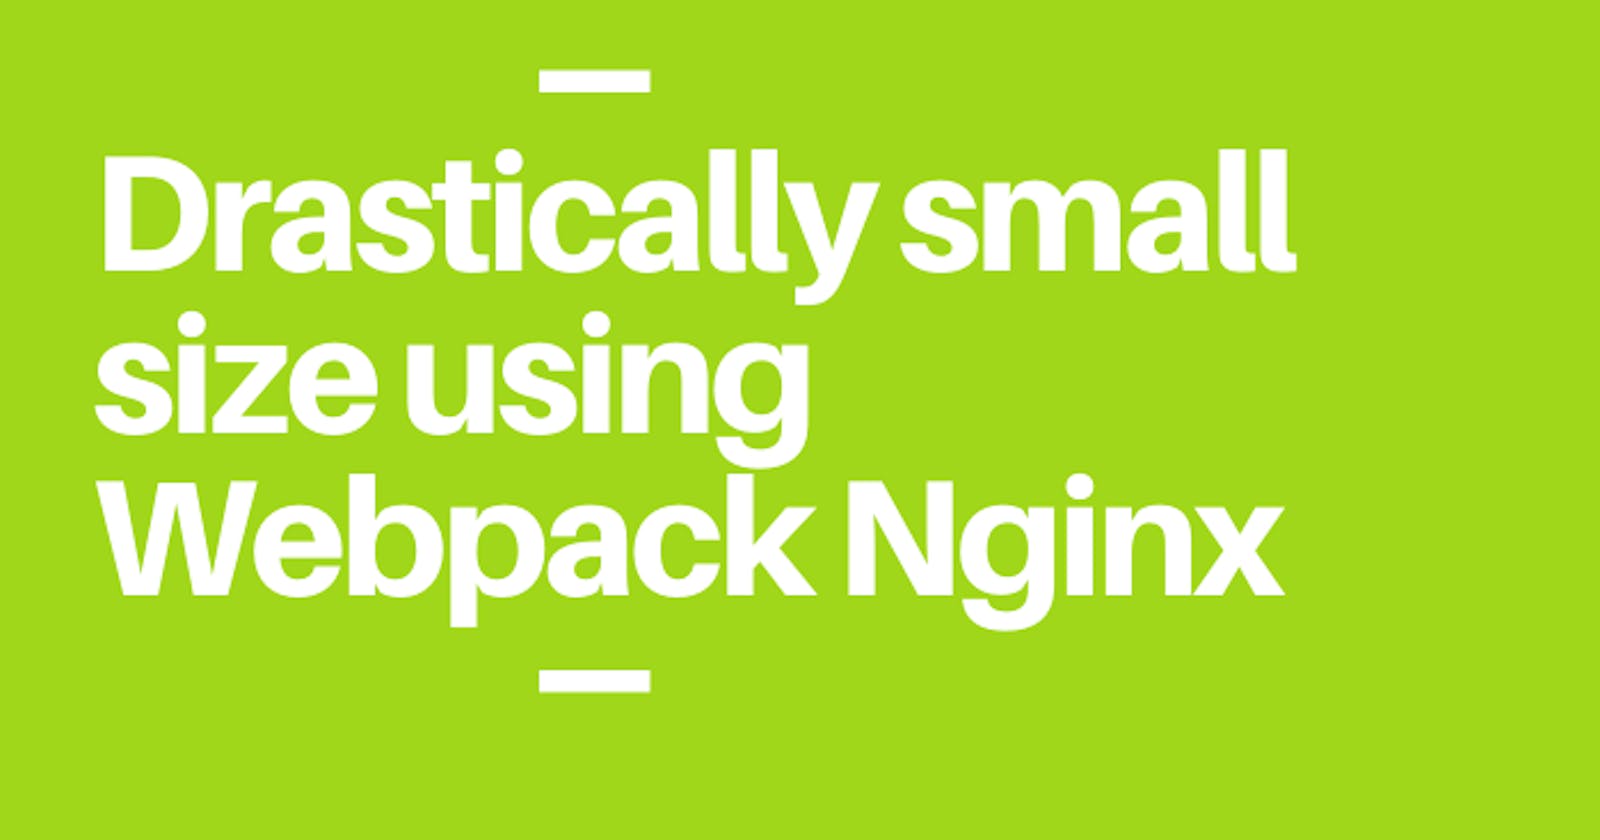 Reduce React App drastically small size using Webpack and Nginx Configuration